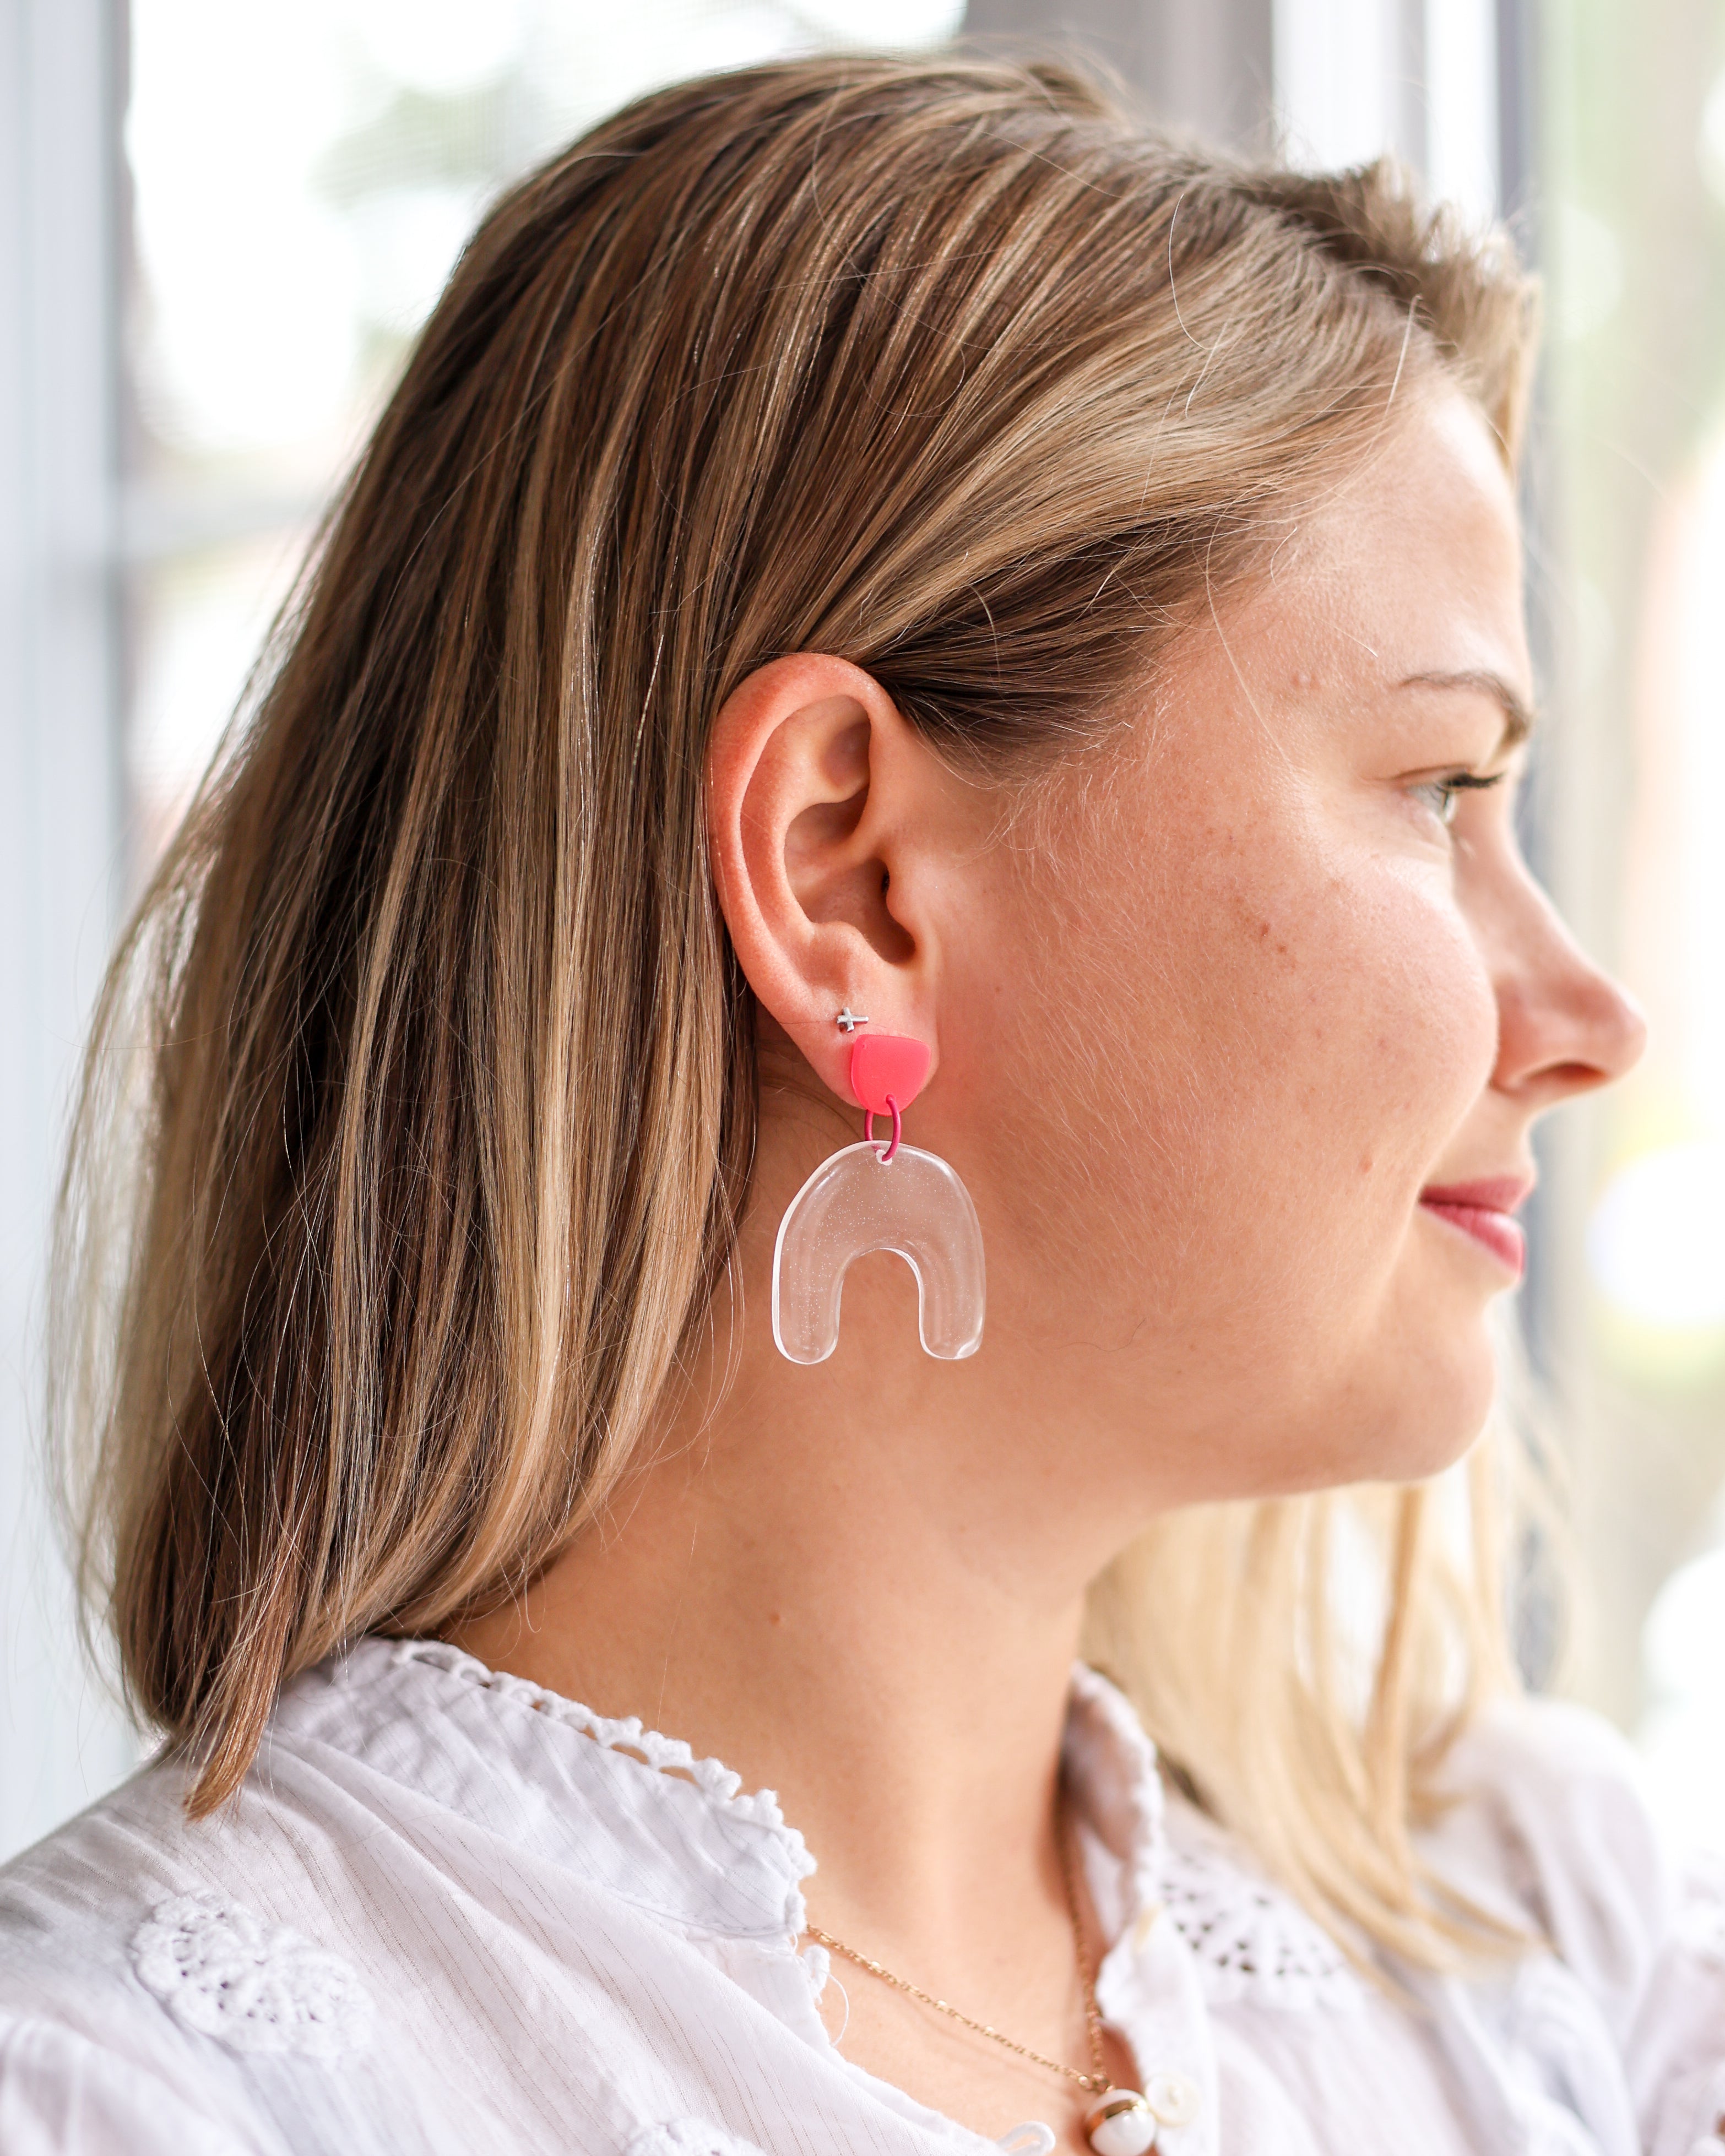 Cute transparent statement earrings with stainless steel posts